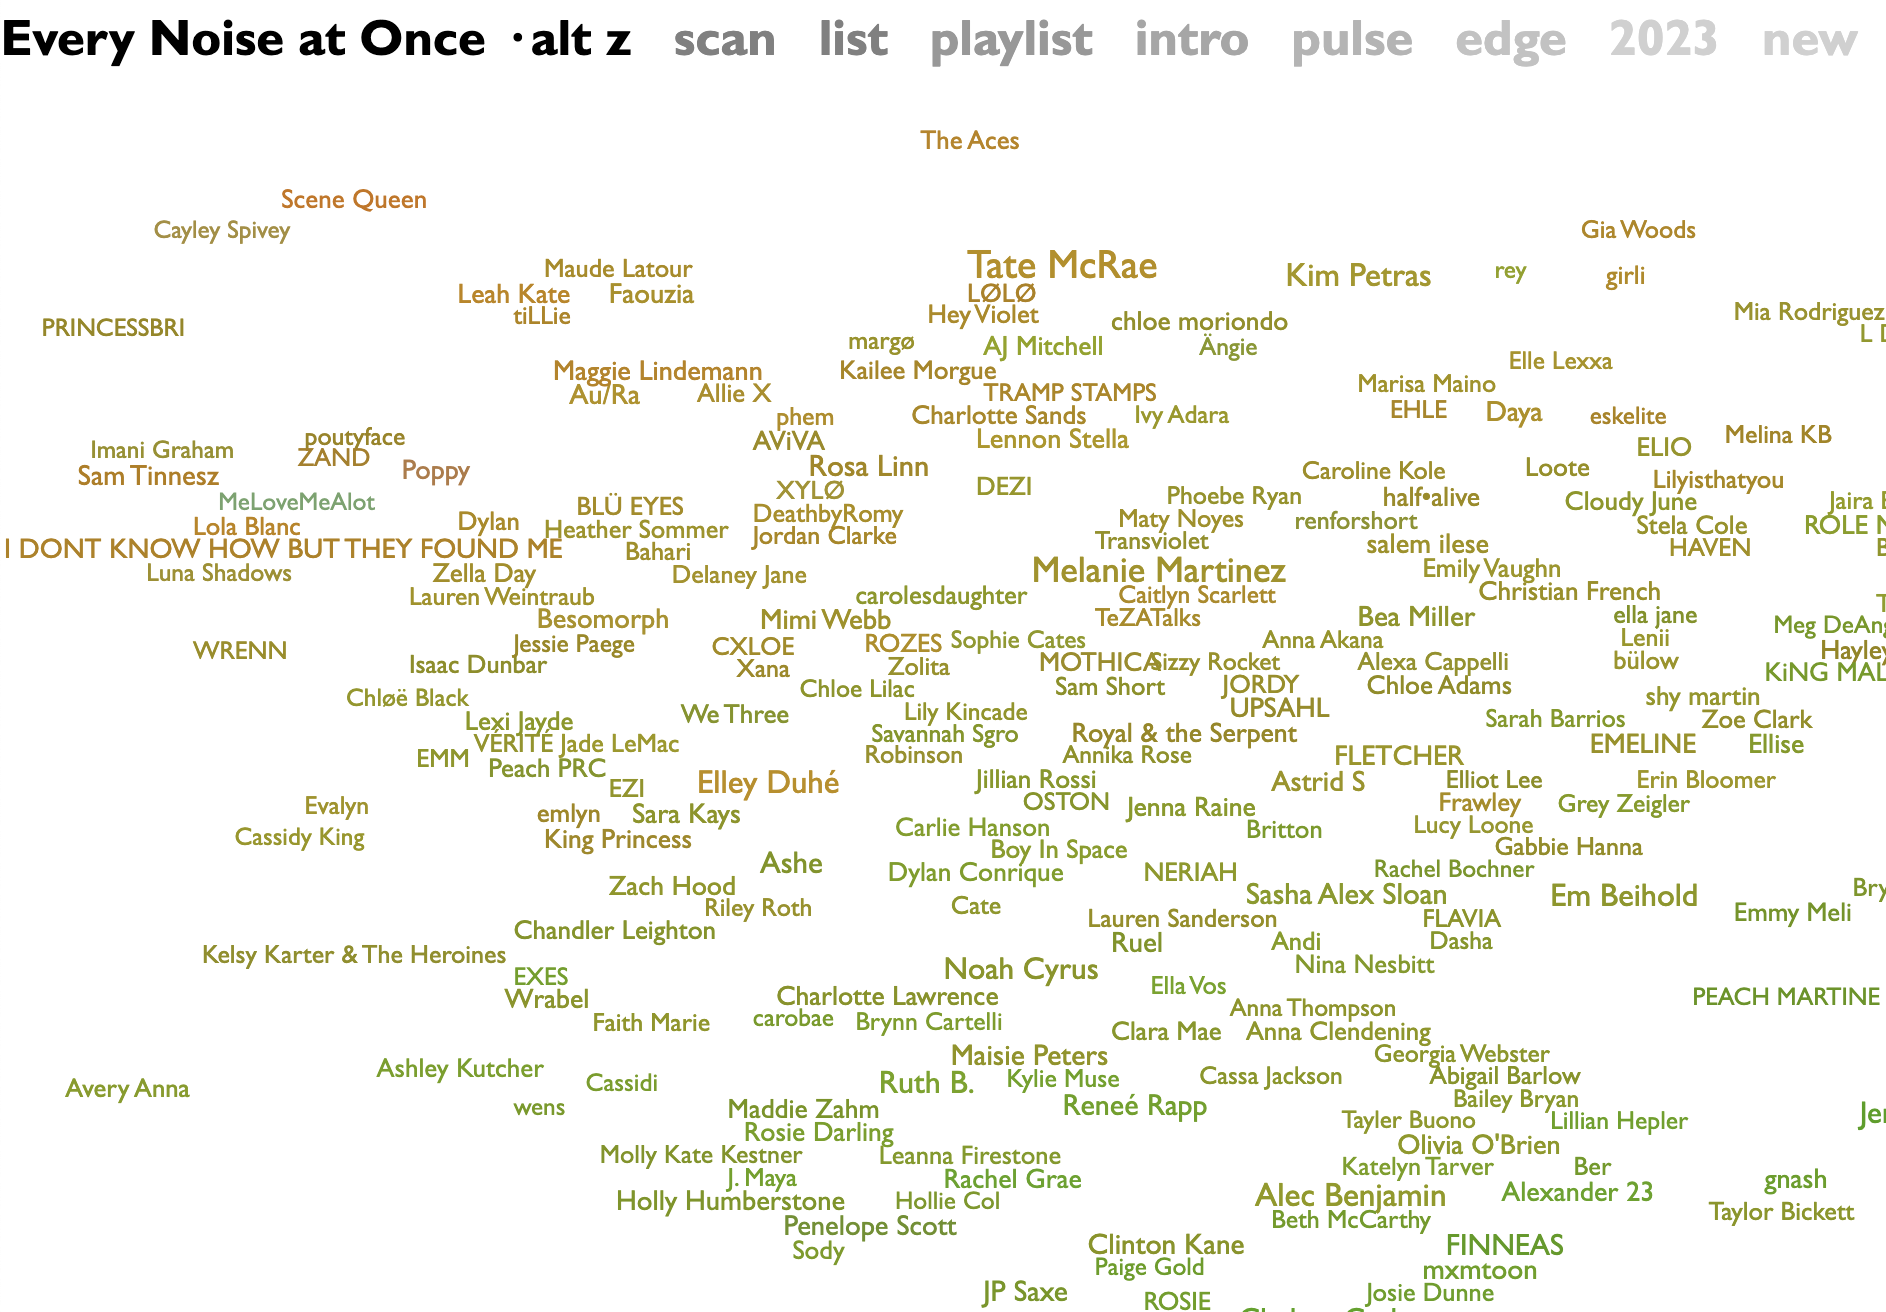 The artists that comprise the Alt Z genre, as displayed on Every Noise at Once. Some that caught my eye are CXLOE, carolesdaughter, Melanie Martinez, Tate McRae, Noah Cyrus, and FINNEAS. The last 4 artists are printed larger than others, so they might be more popular and thus appear as larger on the page.